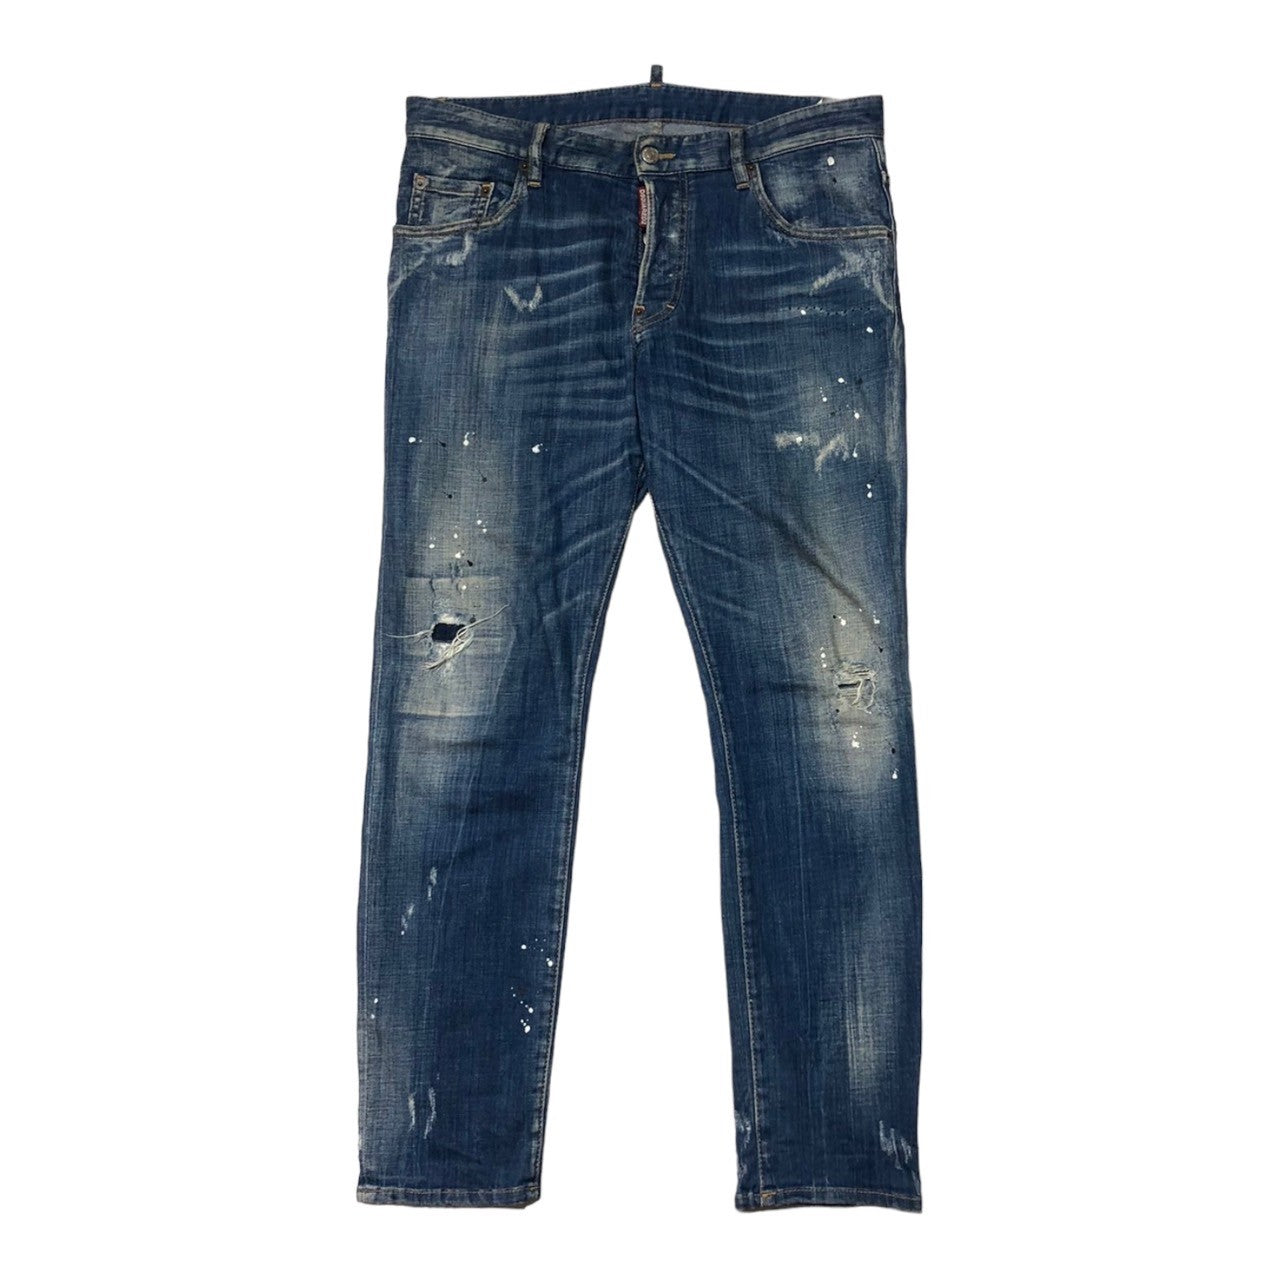 DSQUARED2(ディースクエアード) FADED BLUE WASH SKATER ジーンズ 